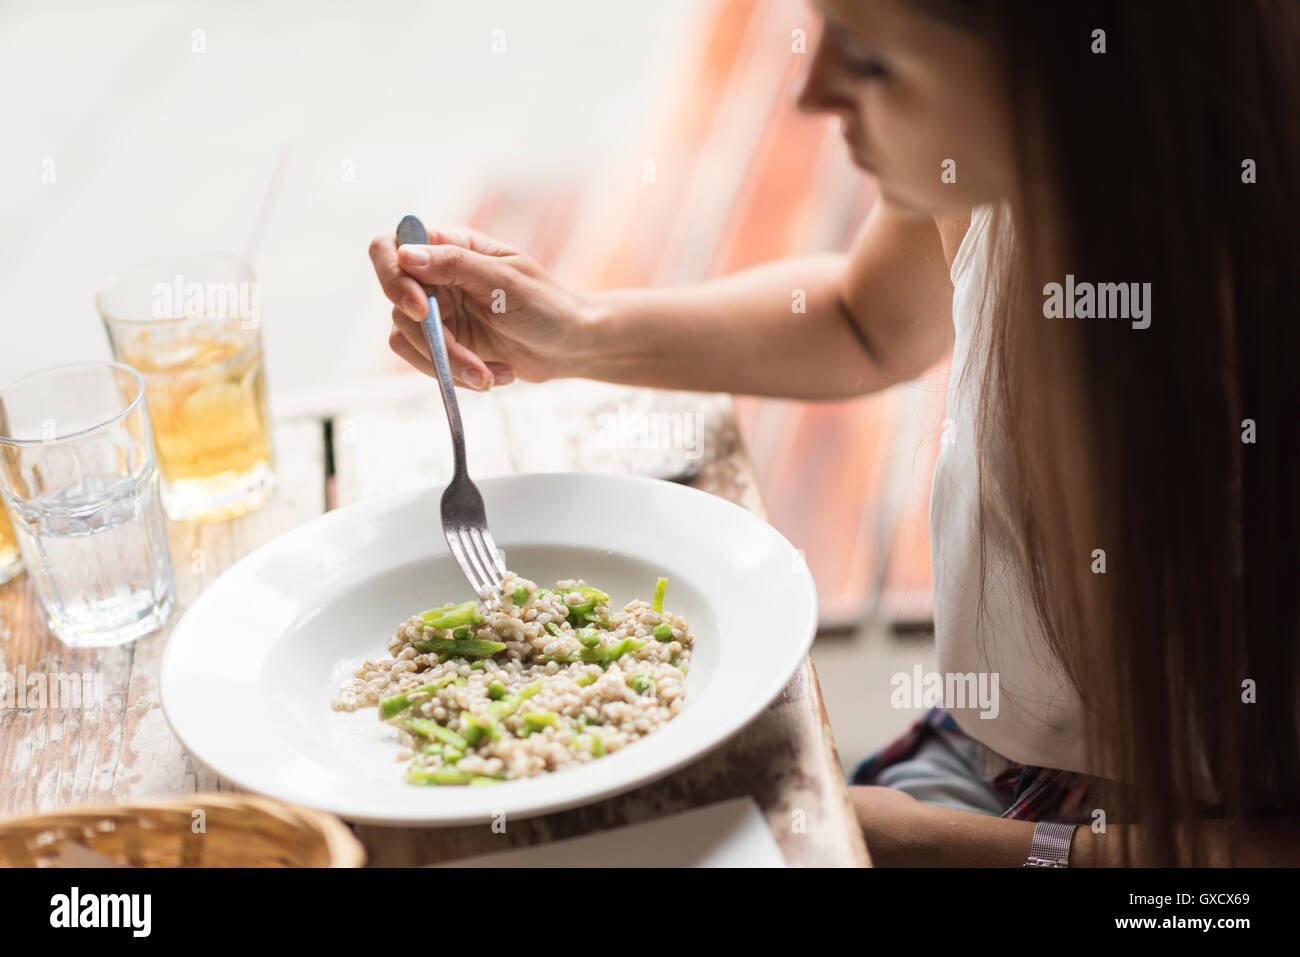 Cropped shot of young woman eating lunch in restaurant Stock Photo